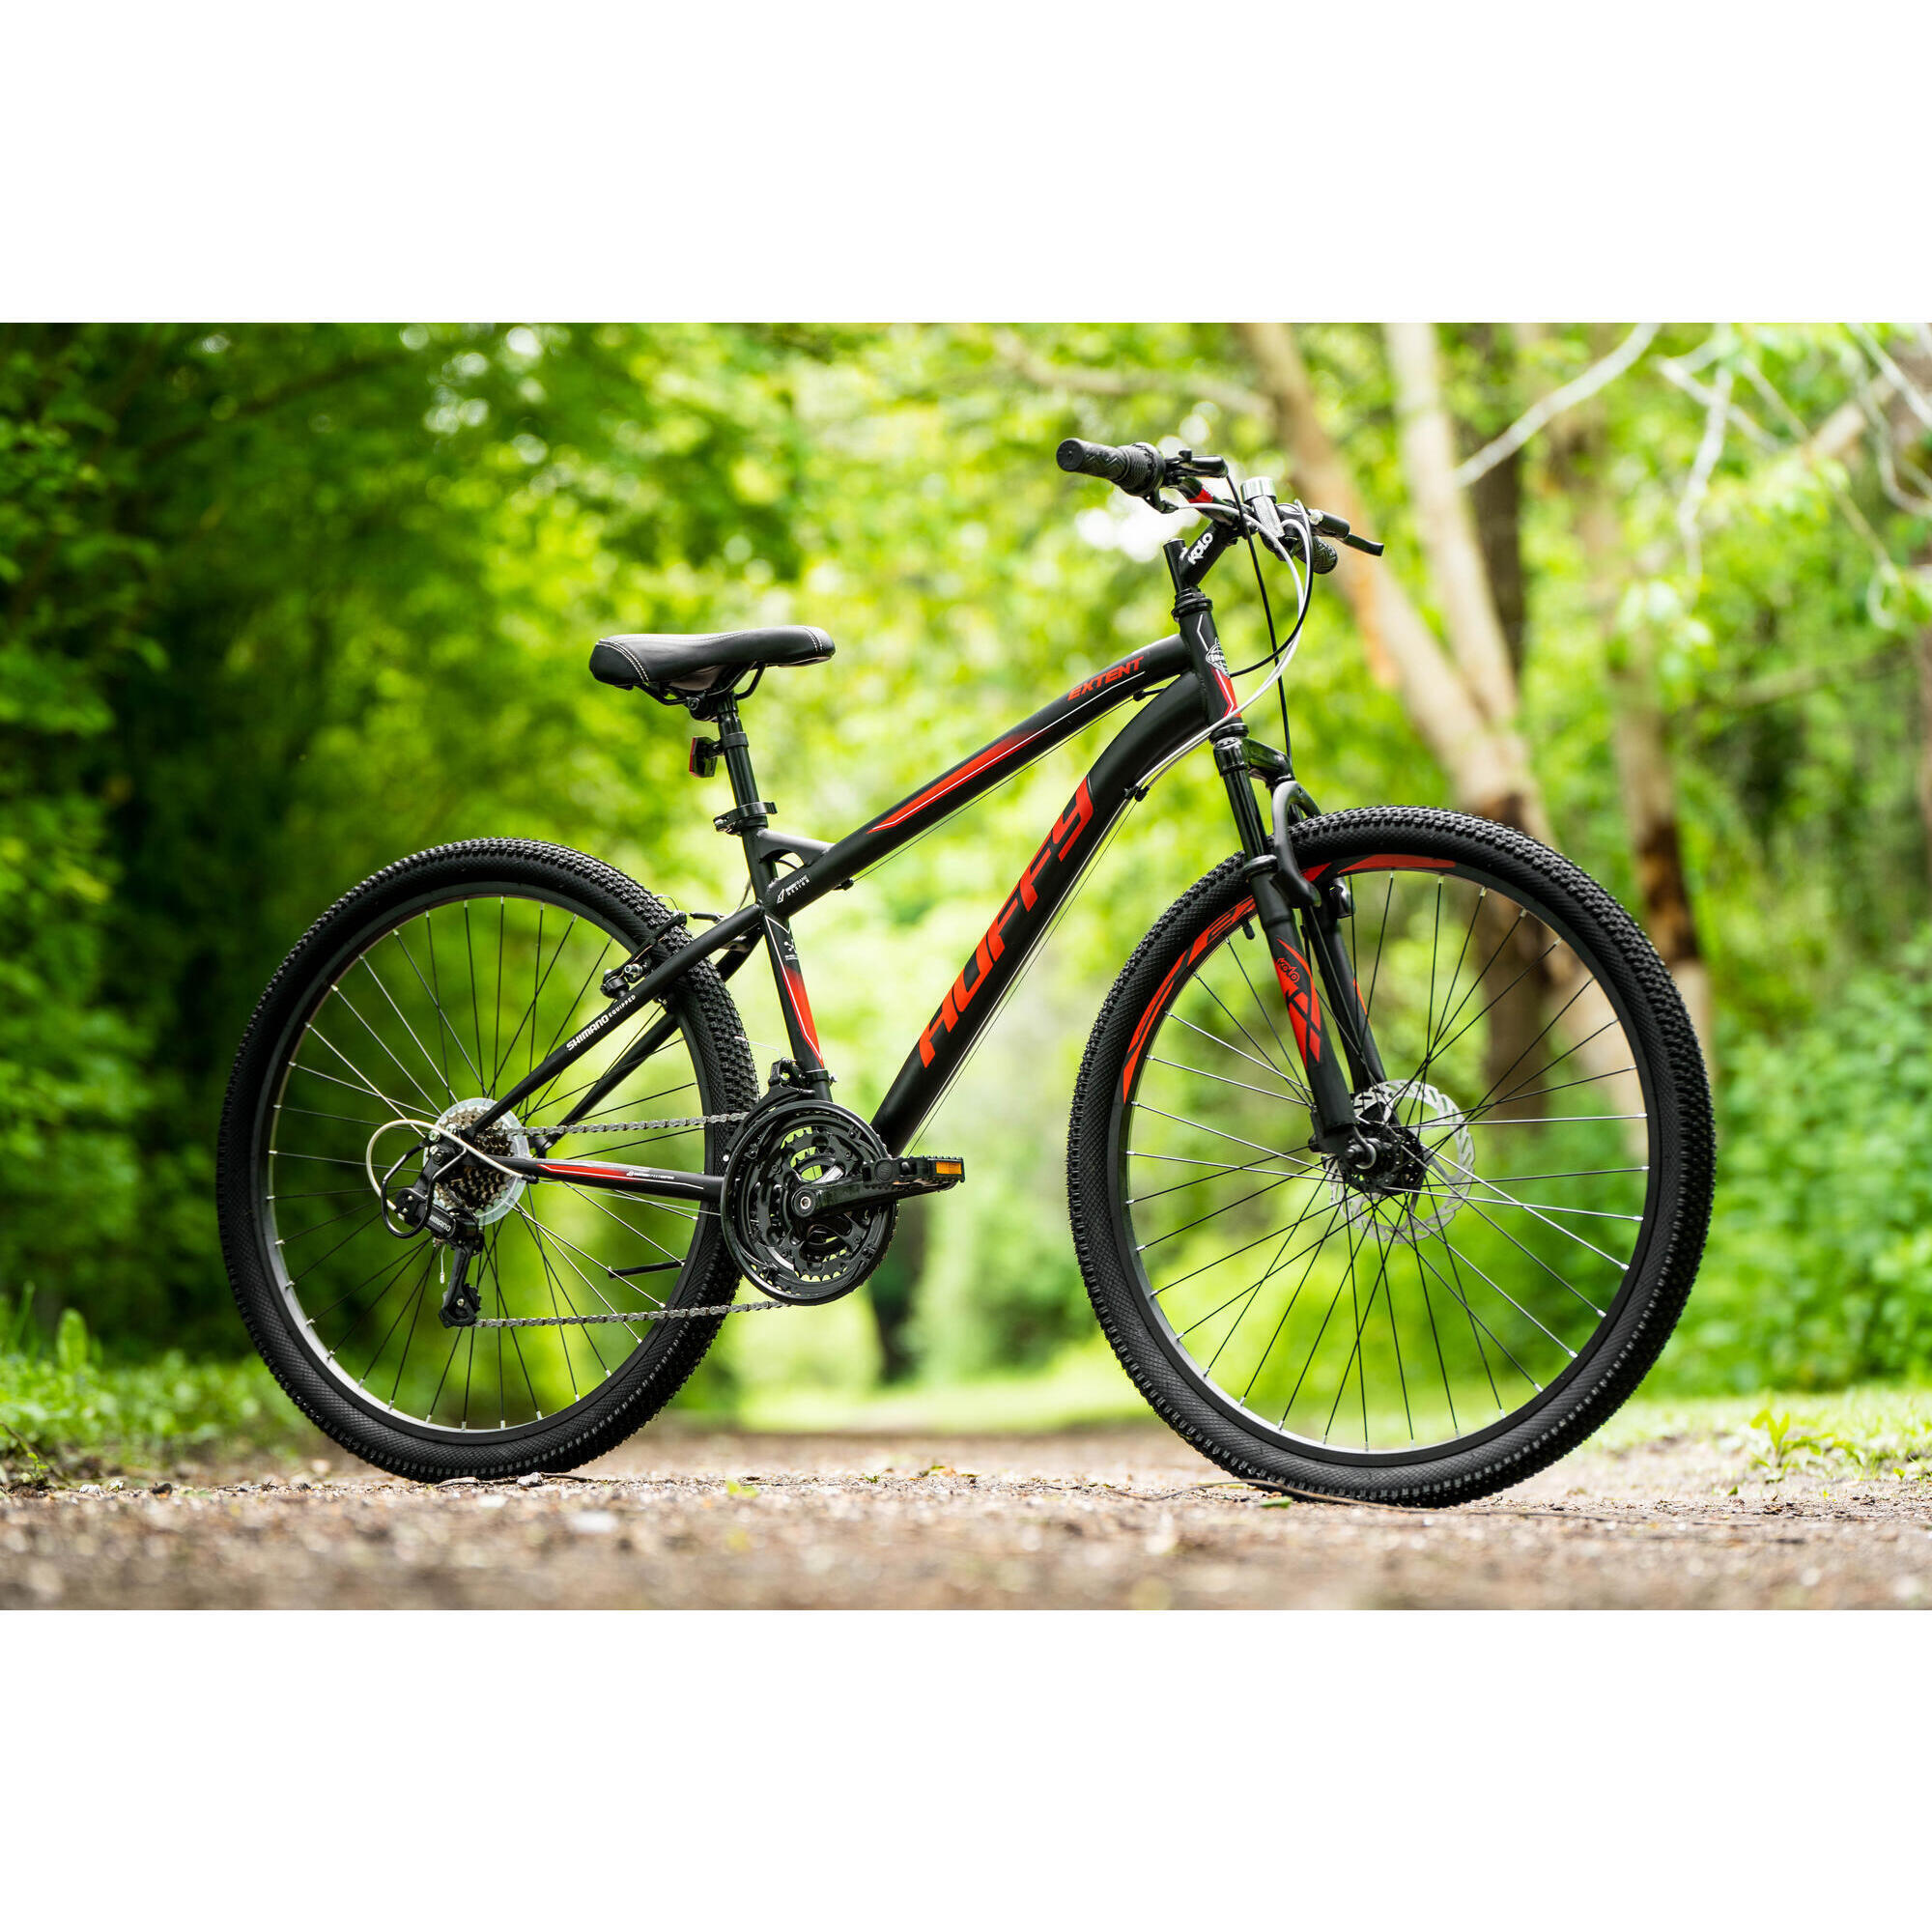 Huffy Extent Mens Mountain Bike 27.5" Wheels 18 Speed Black + Red 5/5